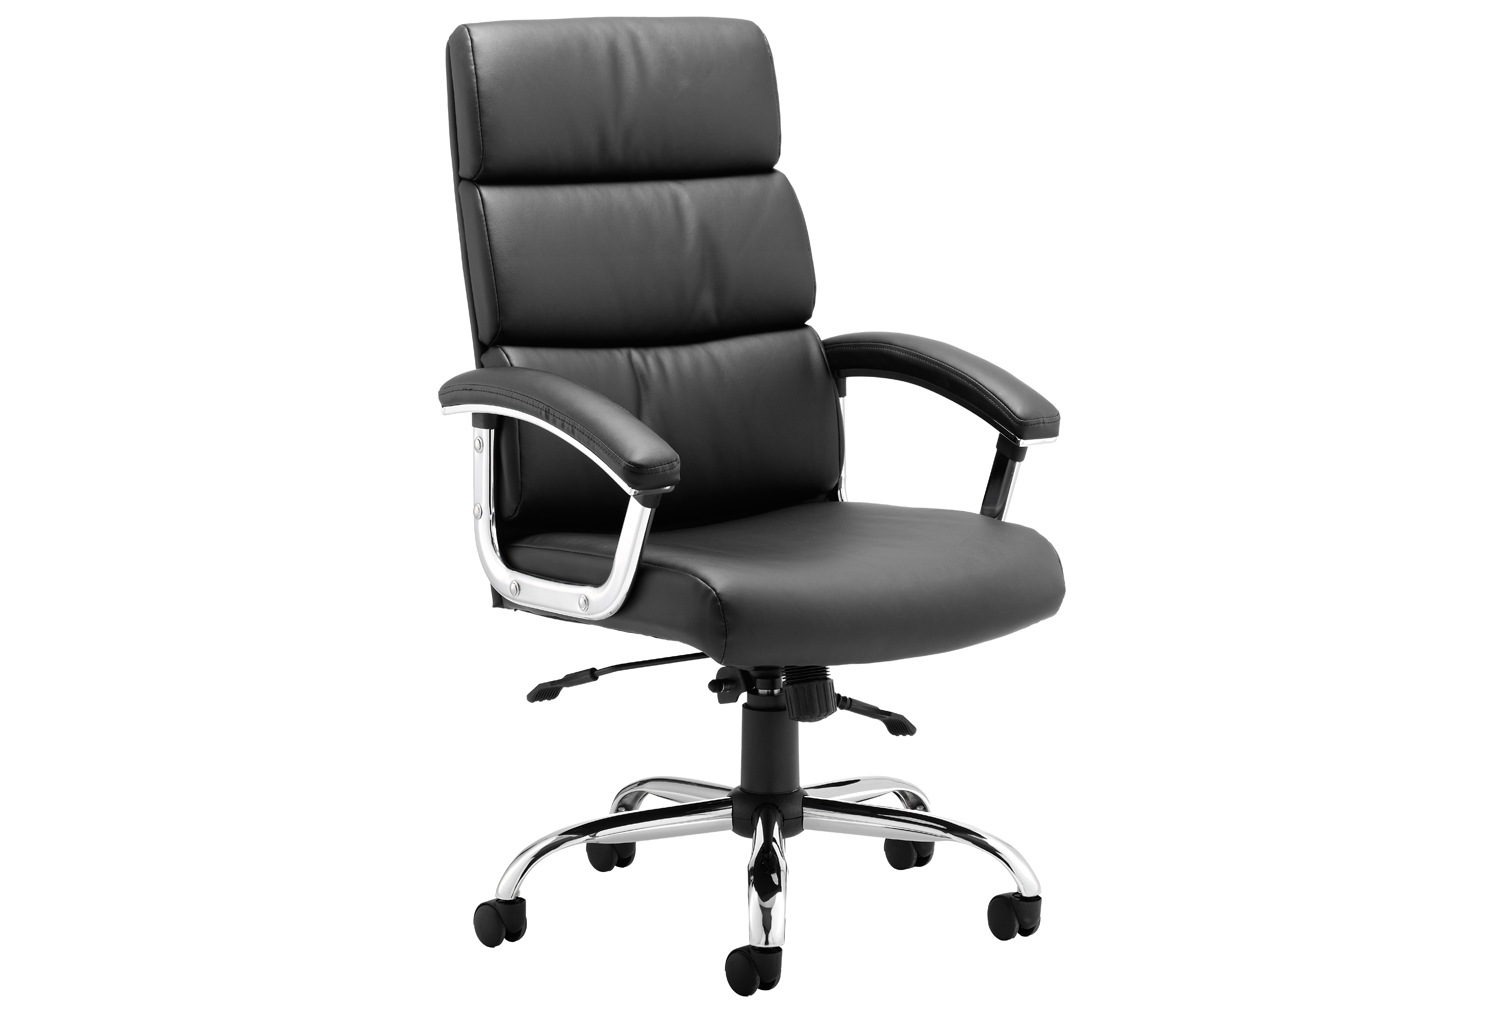 Crave High Back Black Bonded Leather Executive Office Chair, Black